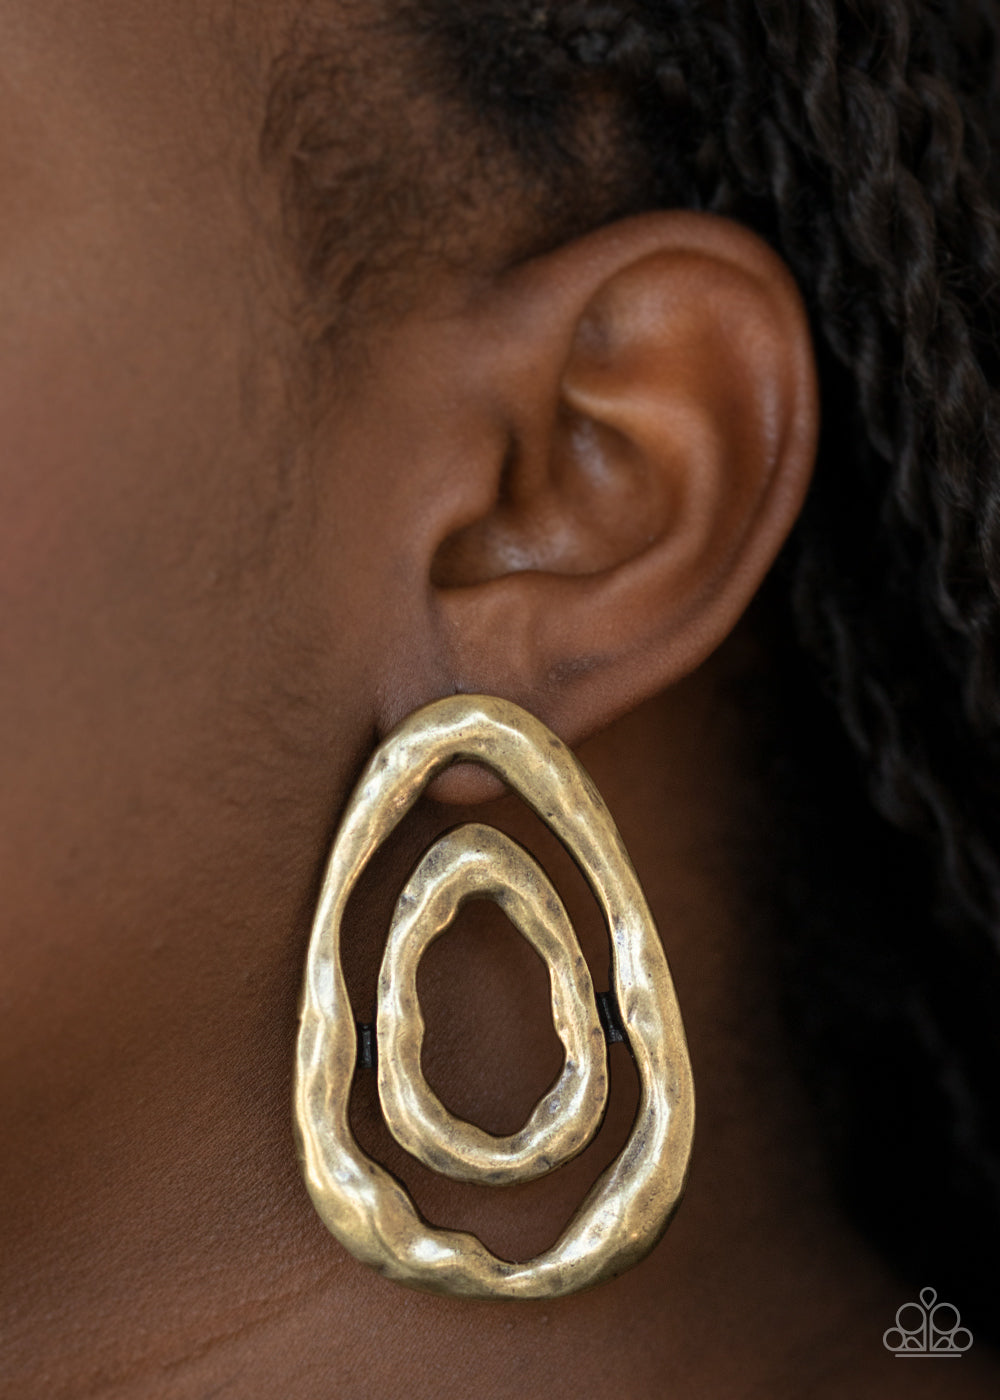 Paparazzi Accessories Ancient Ruins - Brass Earrings - Lady T Accessories